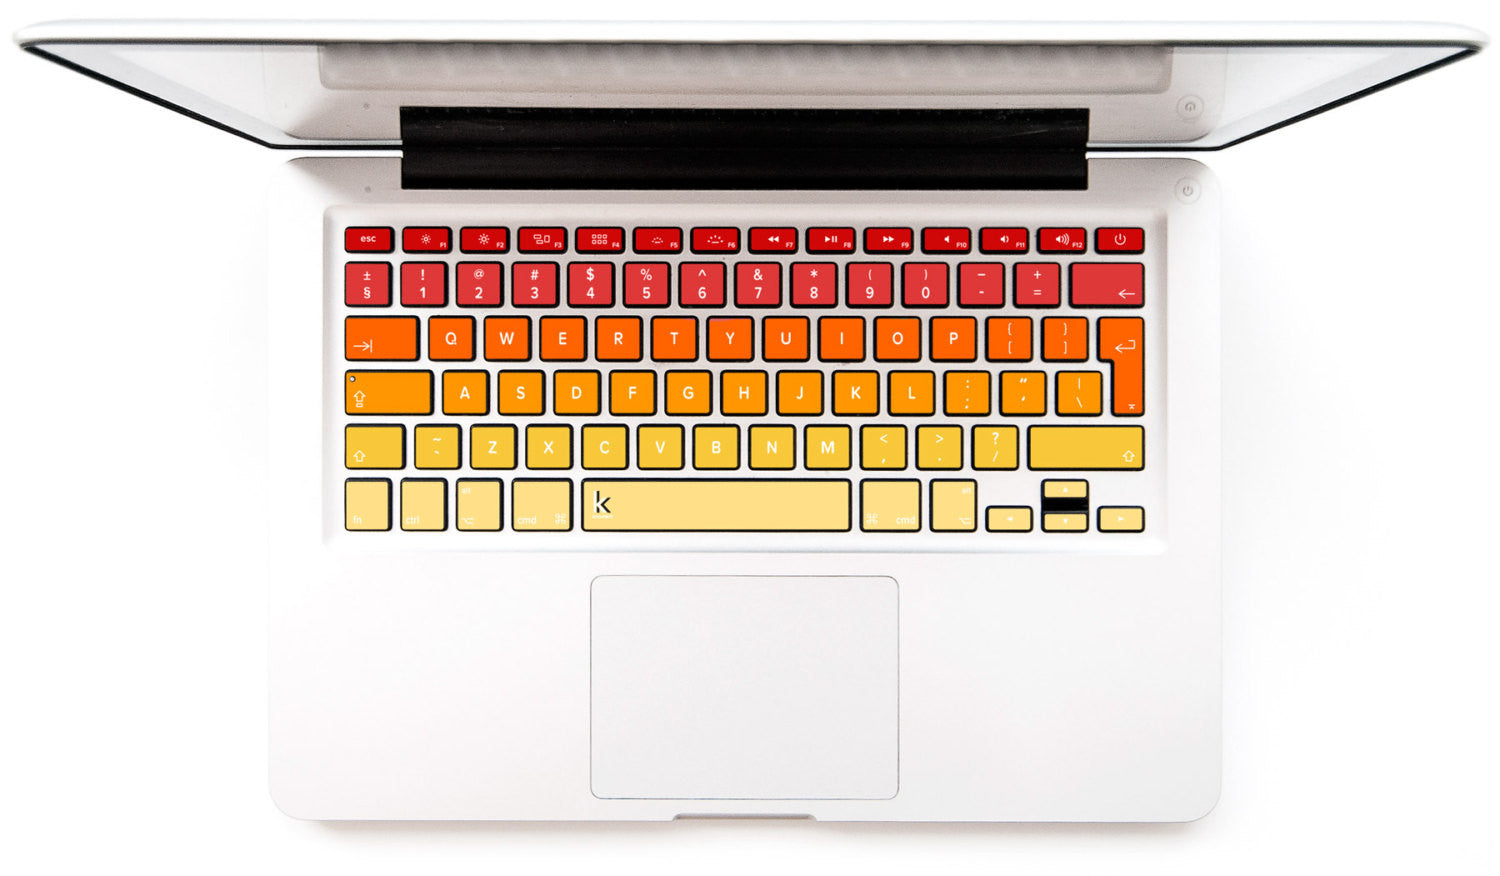 Hot Sauce MacBook Keyboard Stickers decals covers key overlays